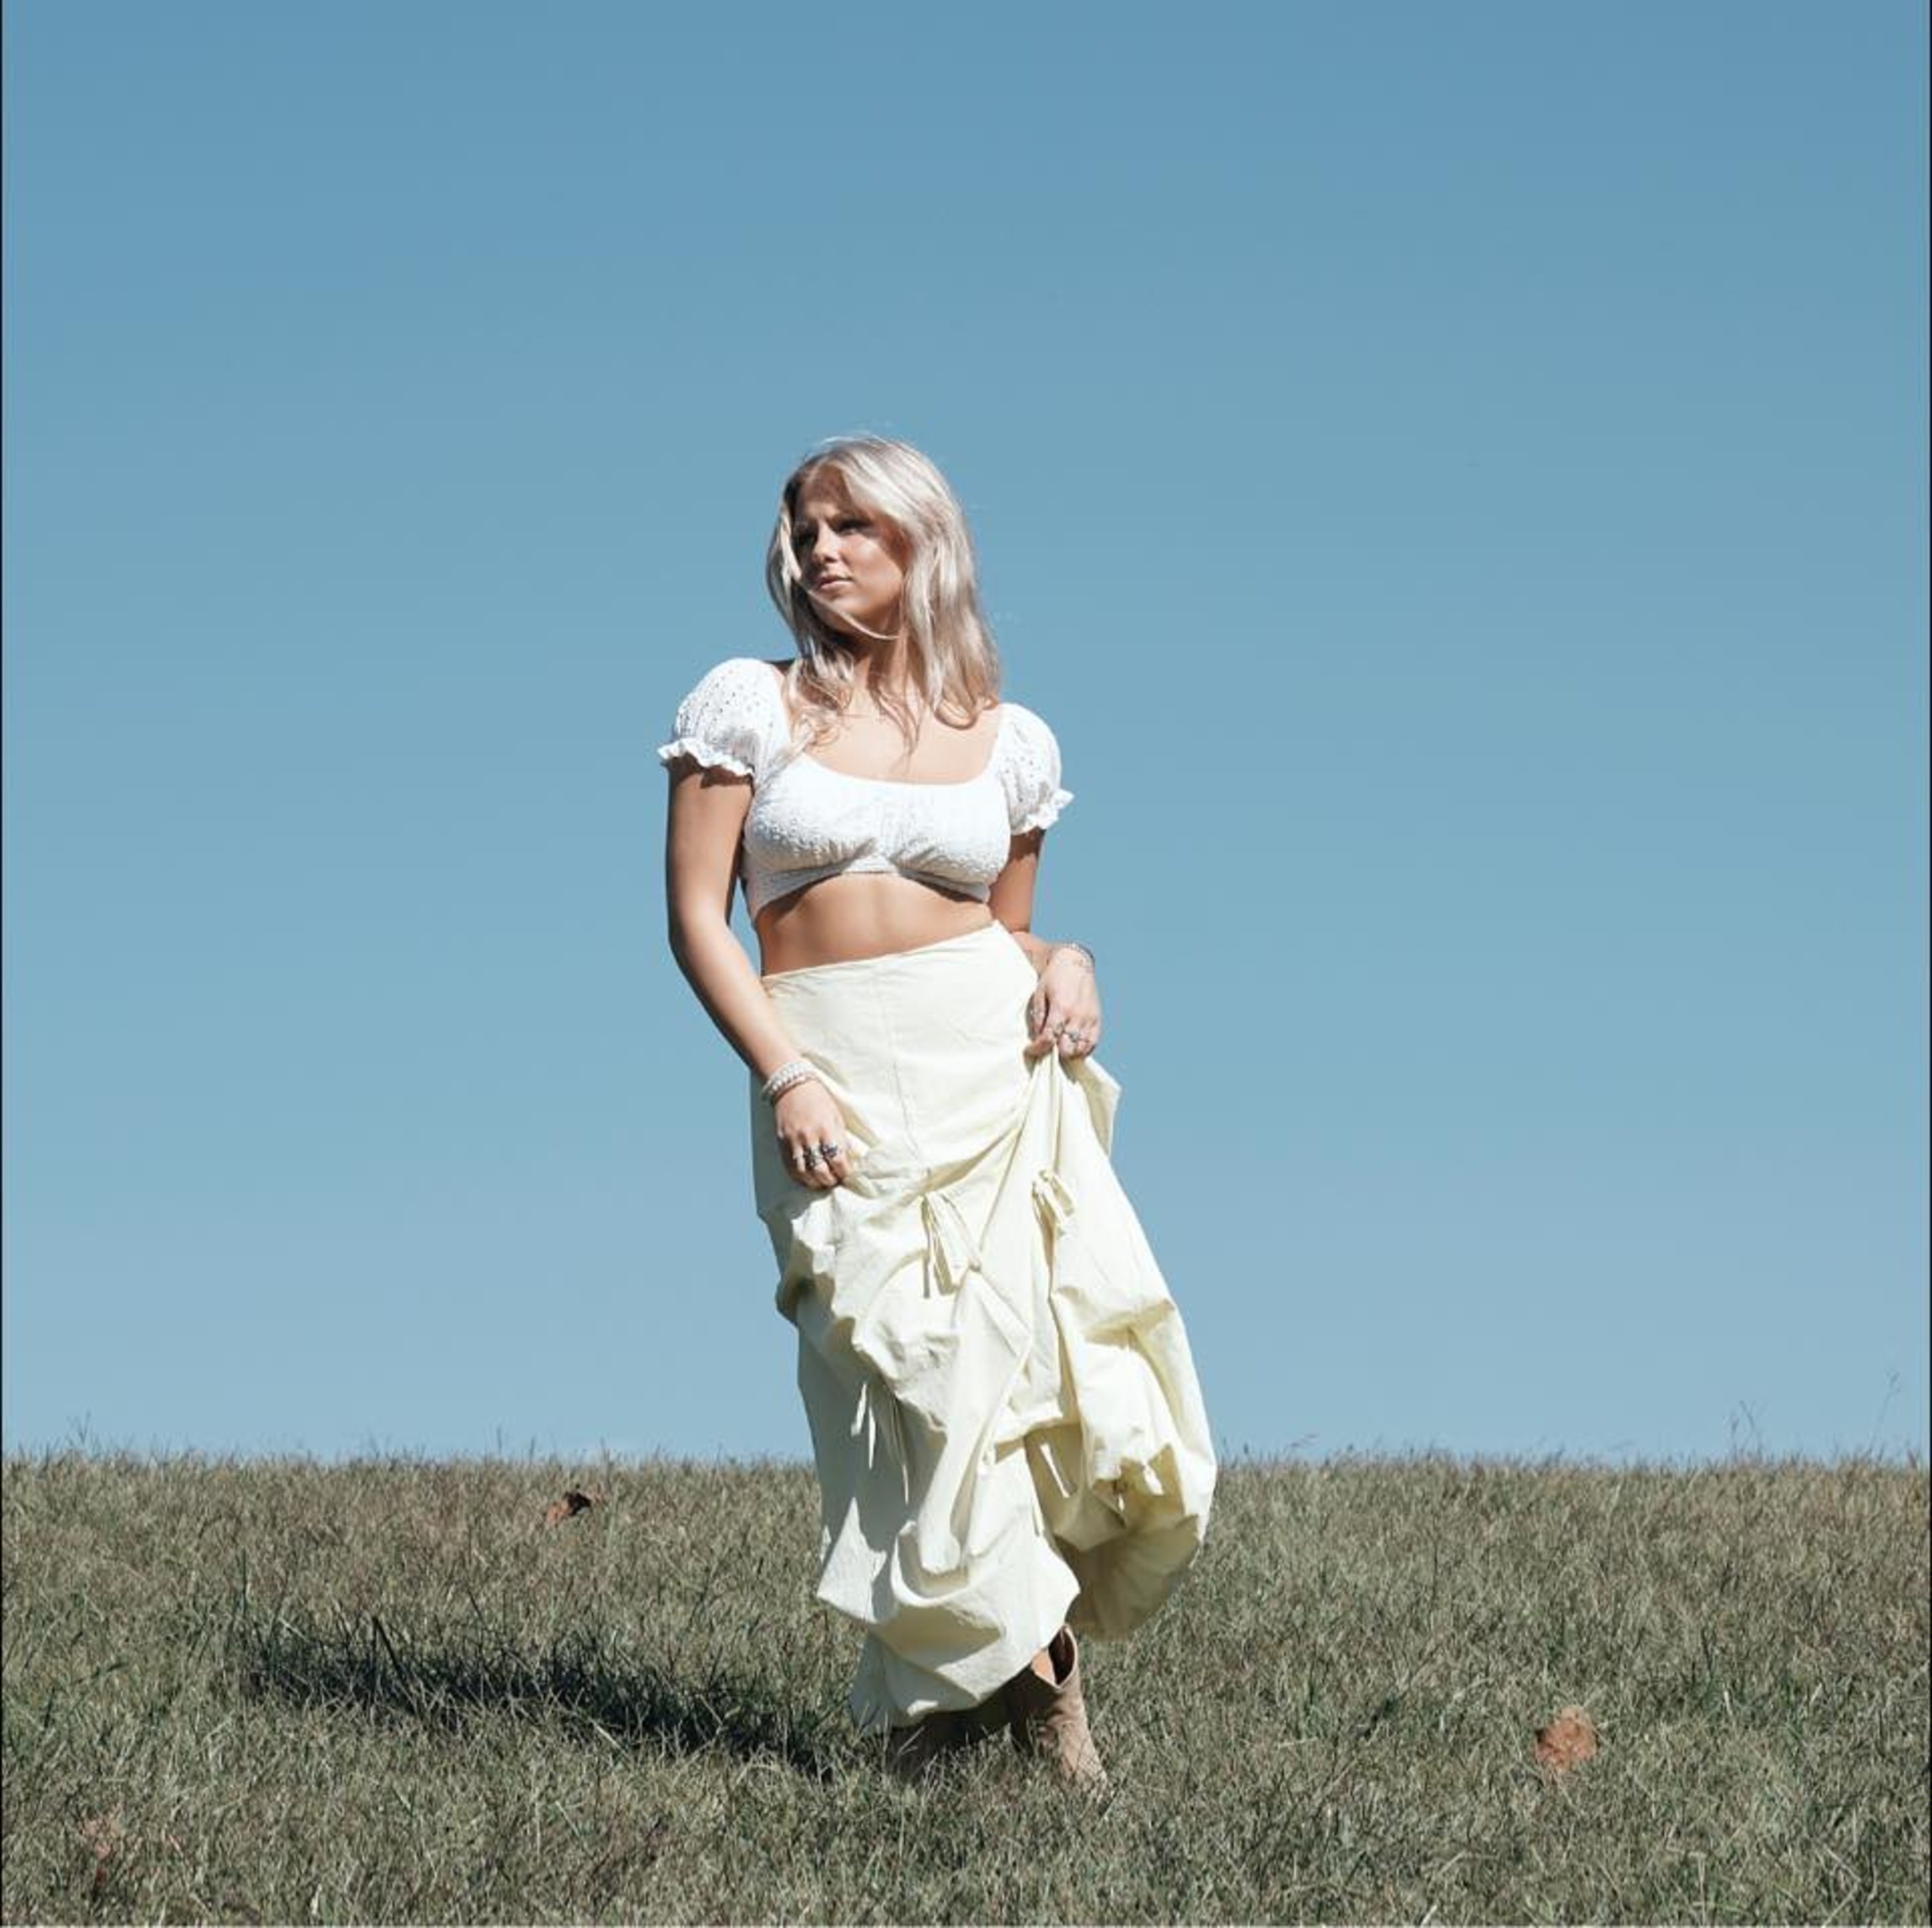 <p>At just 19 years old, singer-songwriter Ashley Anne writes heartfelt, emotion-drenched lyrics that are wise beyond her years. Just listen to "Dear Dolly," a tune addressed to the legend Dolly Parton herself, as proof. </p><p>You may also like: <a href='https://www.yardbarker.com/entertainment/articles/18_of_the_funniest_songs_in_music_history/s1__40239880'>18 of the funniest songs in music history</a></p>